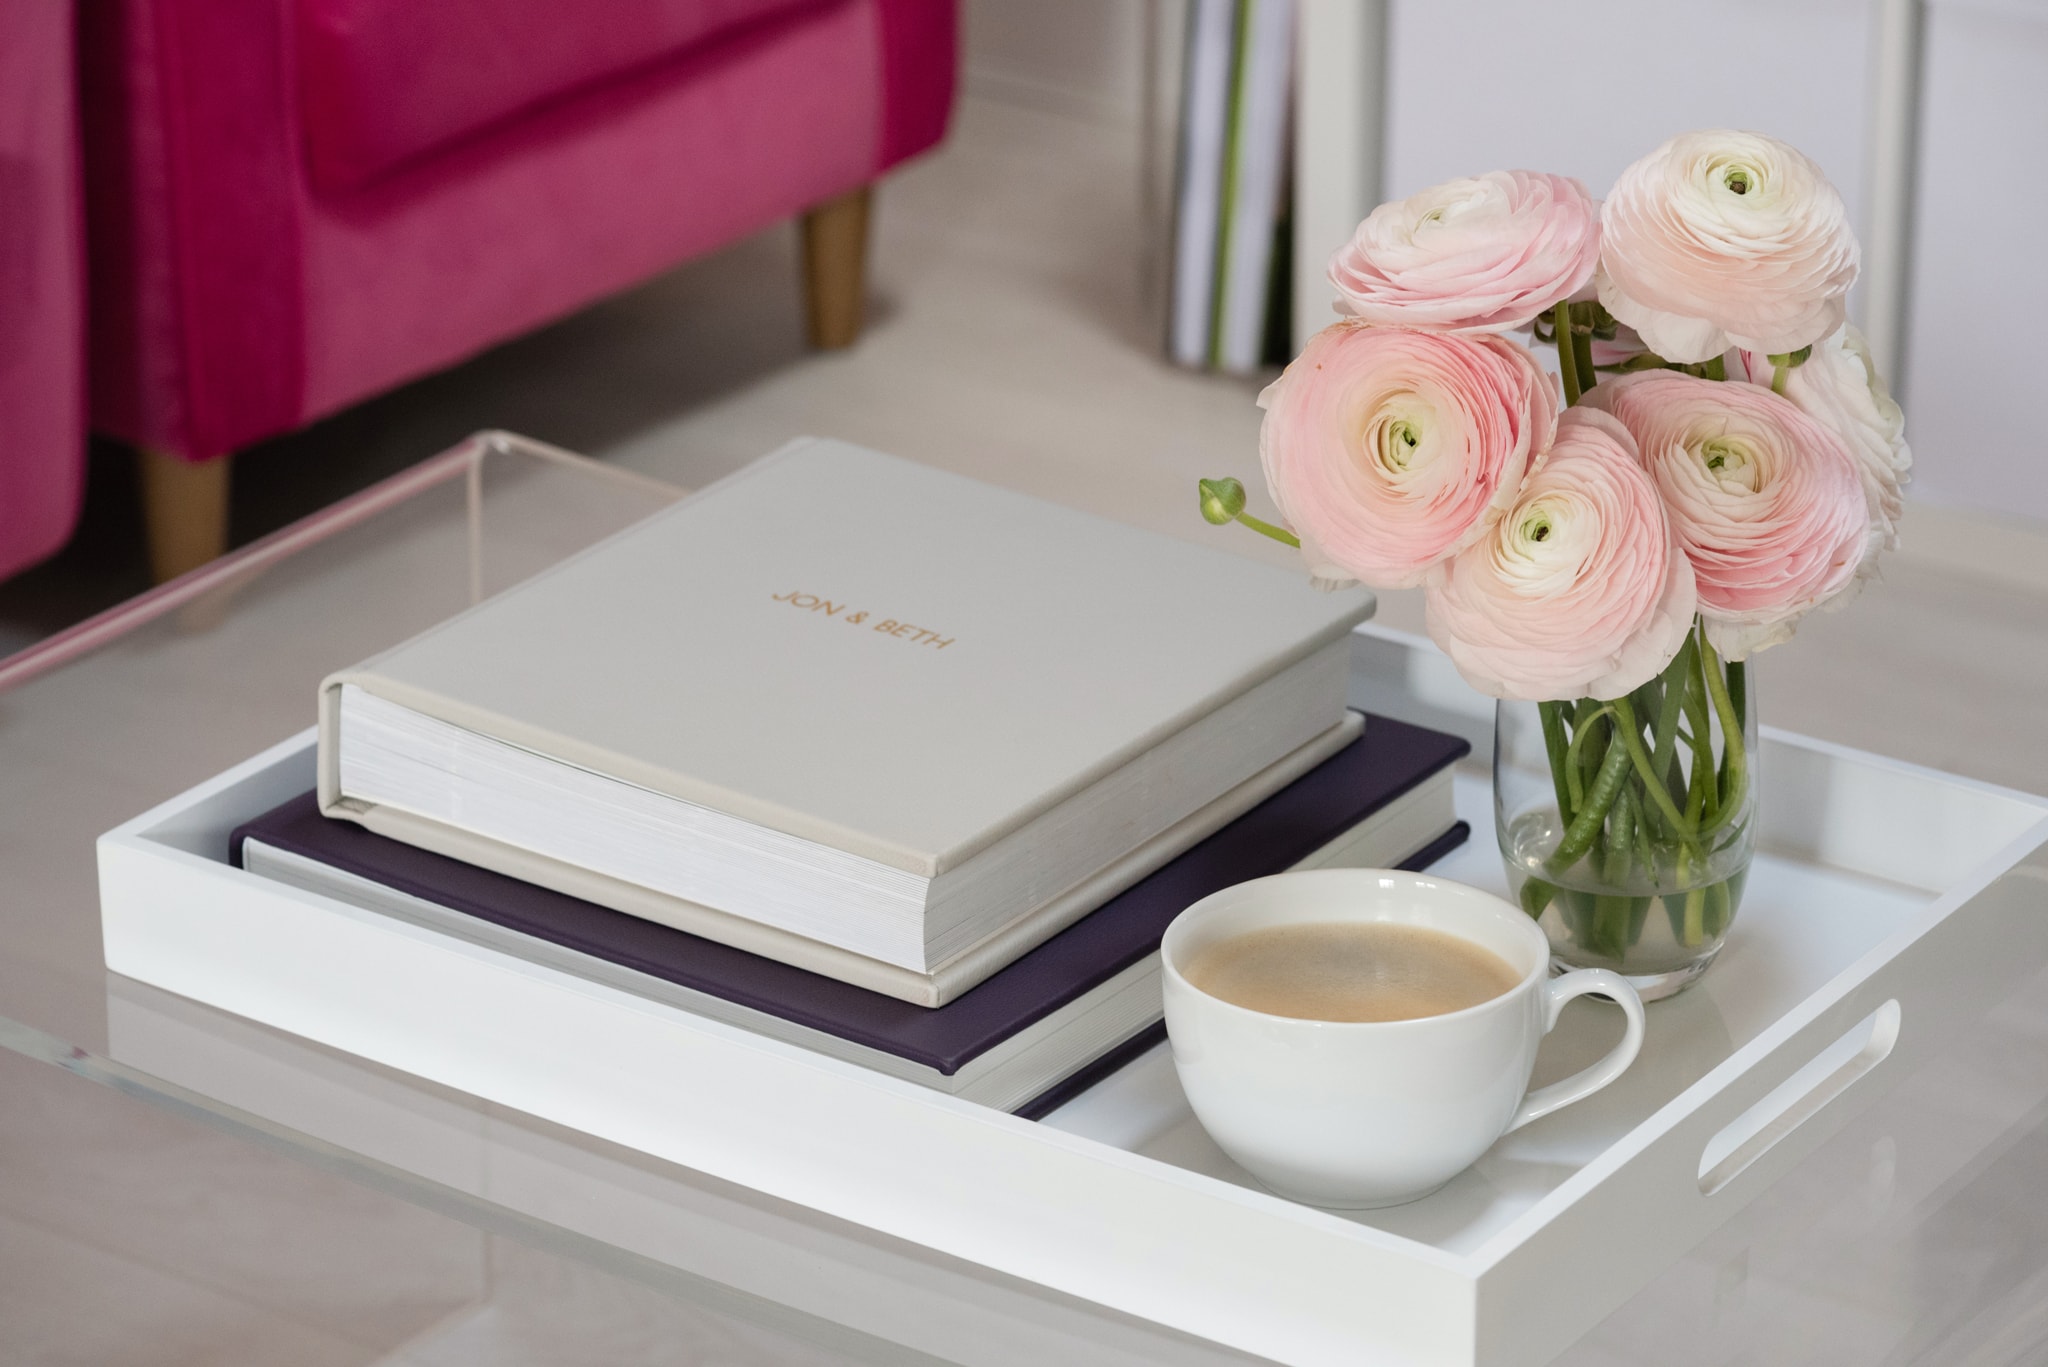 Two fine art wedding albums on a tray with a cup of coffee and pale pink ranunculus in a vase